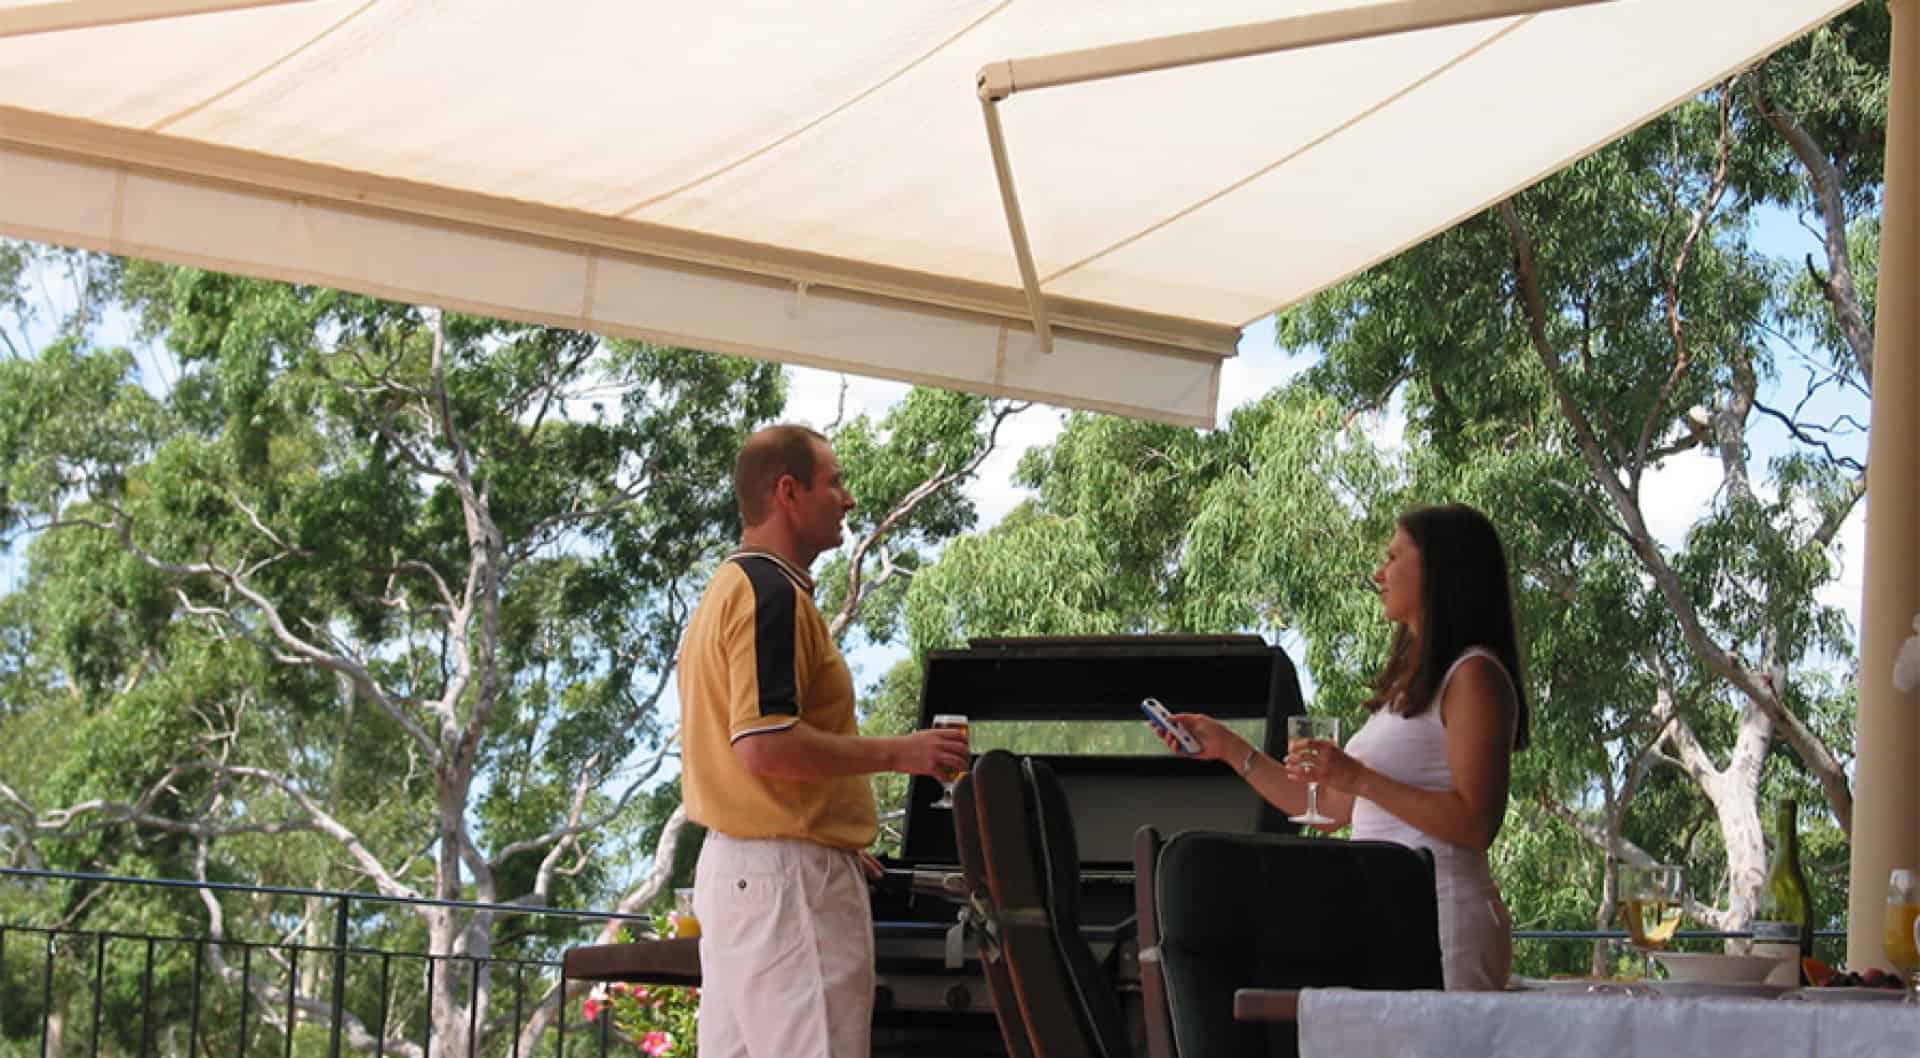 Stanbond SA - Outdoor Awnings Adelaide - Image of folding arm awnings